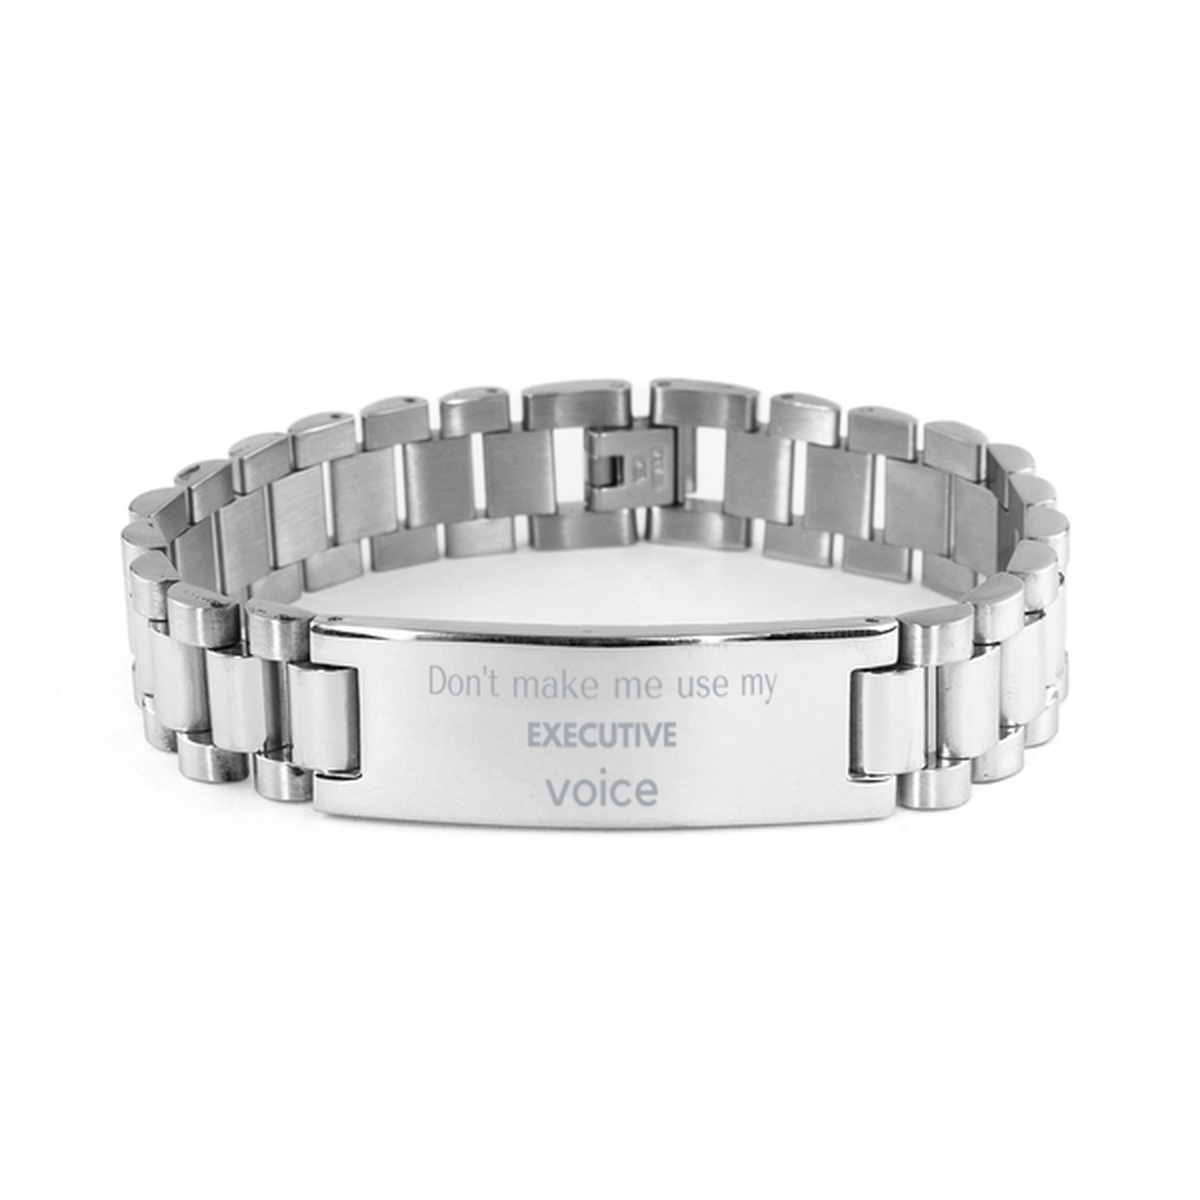 Don't make me use my Executive voice, Sarcasm Executive Gifts, Christmas Executive Ladder Stainless Steel Bracelet Birthday Unique Gifts For Executive Coworkers, Men, Women, Colleague, Friends